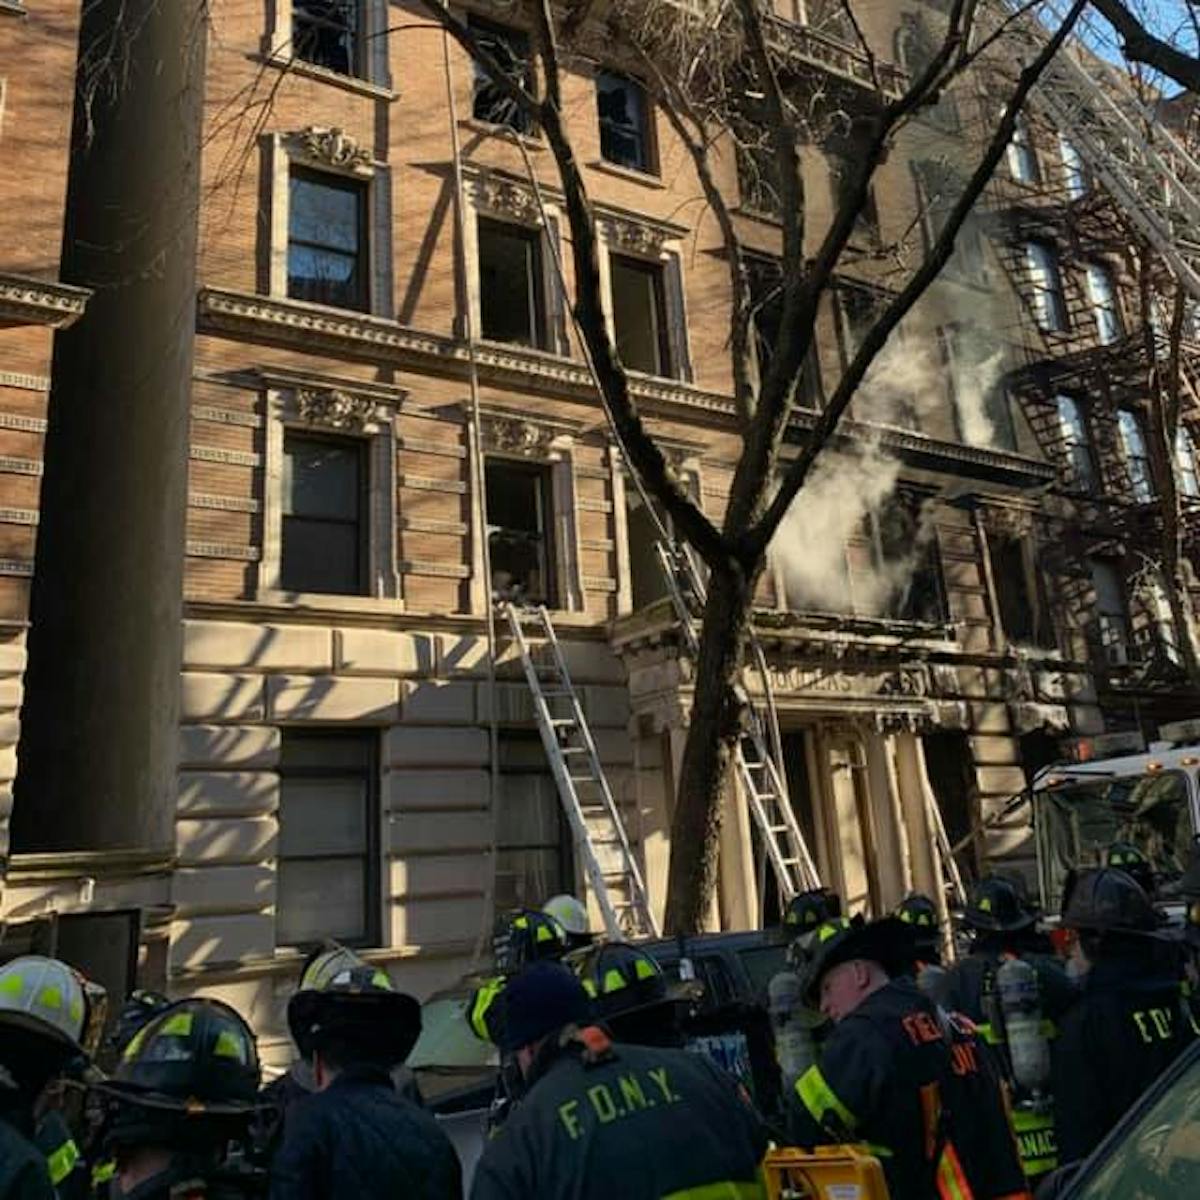 A massive fire at a Harlem apartment building injured 21 firefighters Saturday.